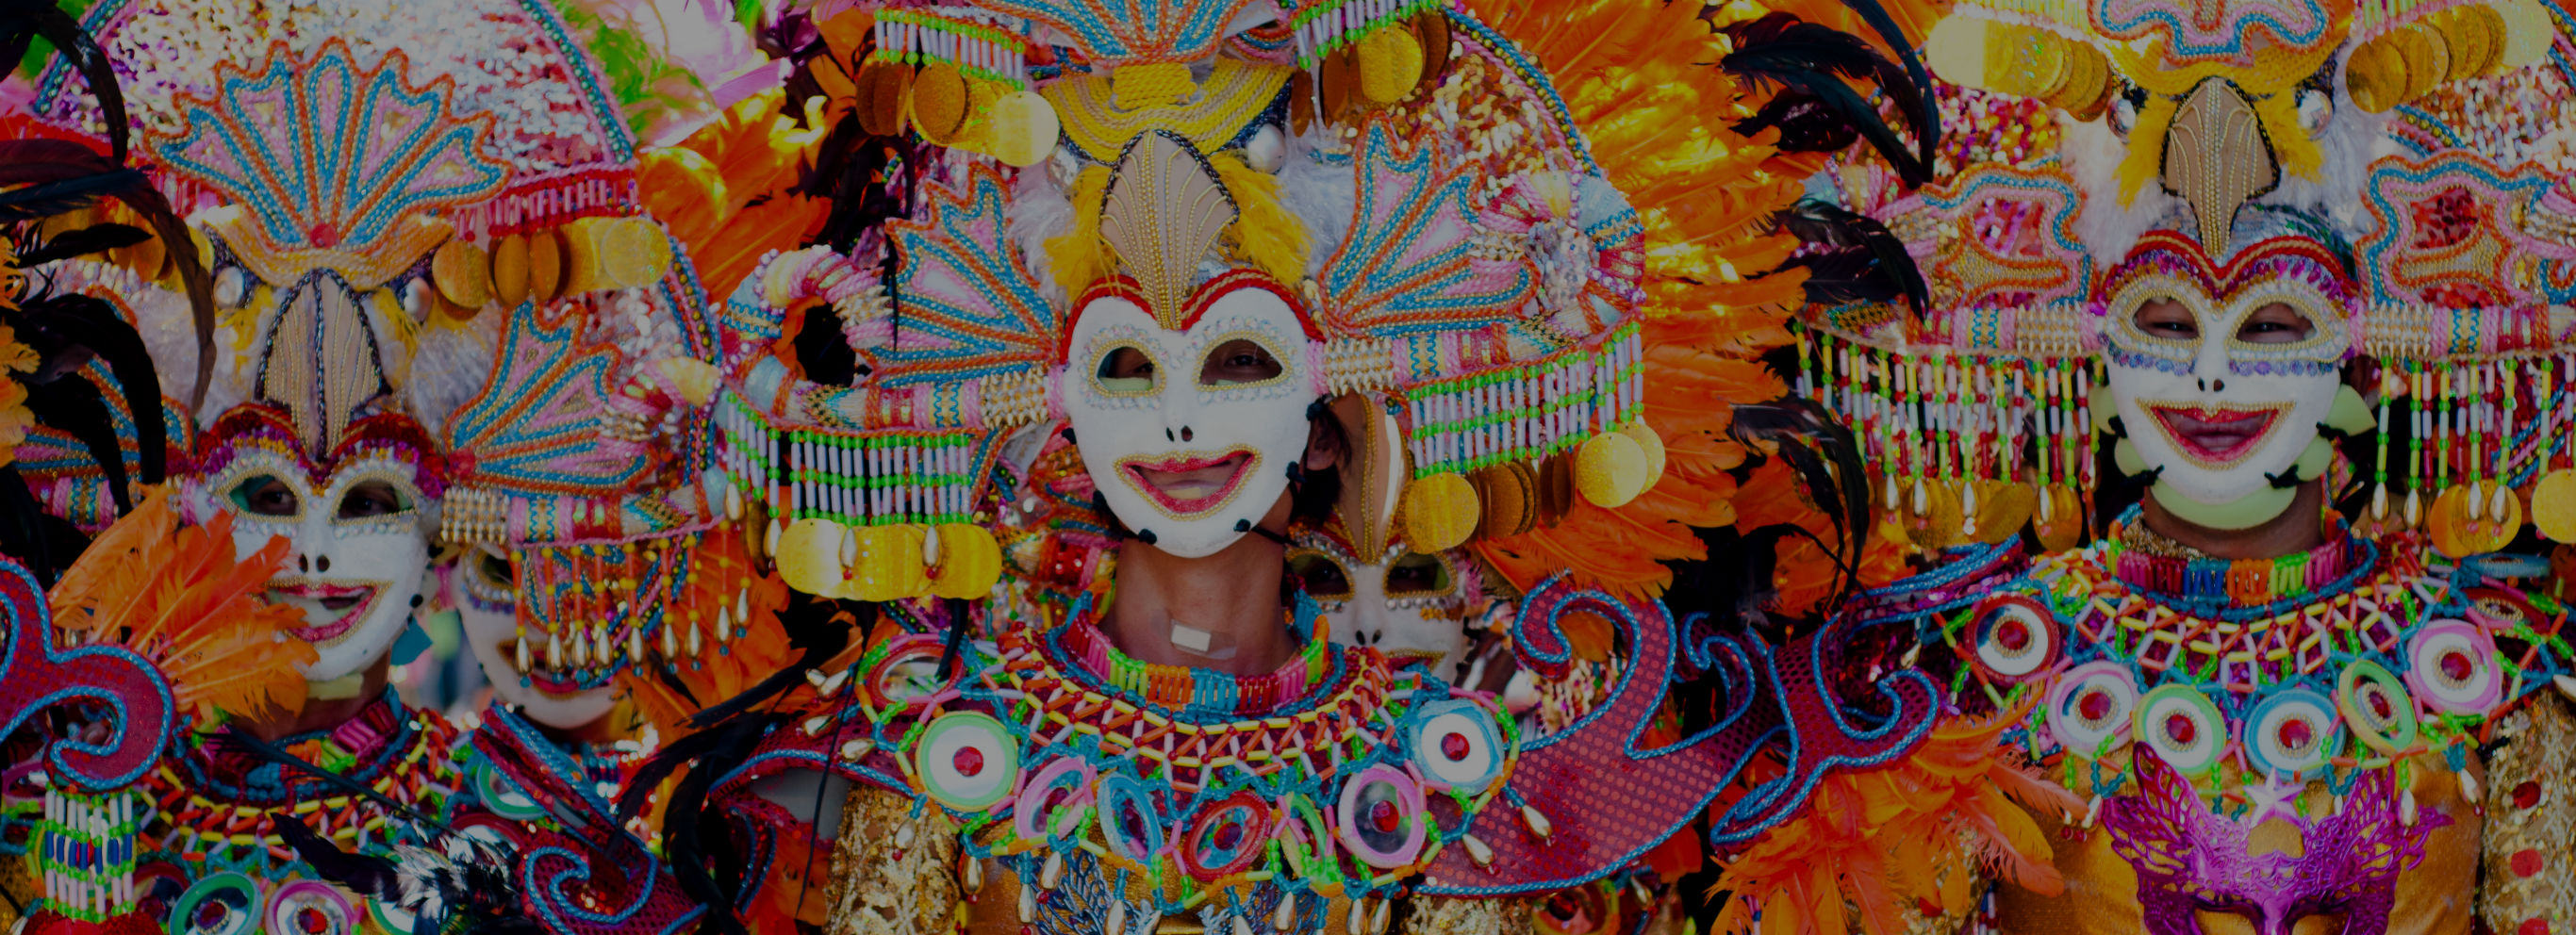 Parade of colorful smiling mask at Masskara Festival, Bacolod City, Philippines